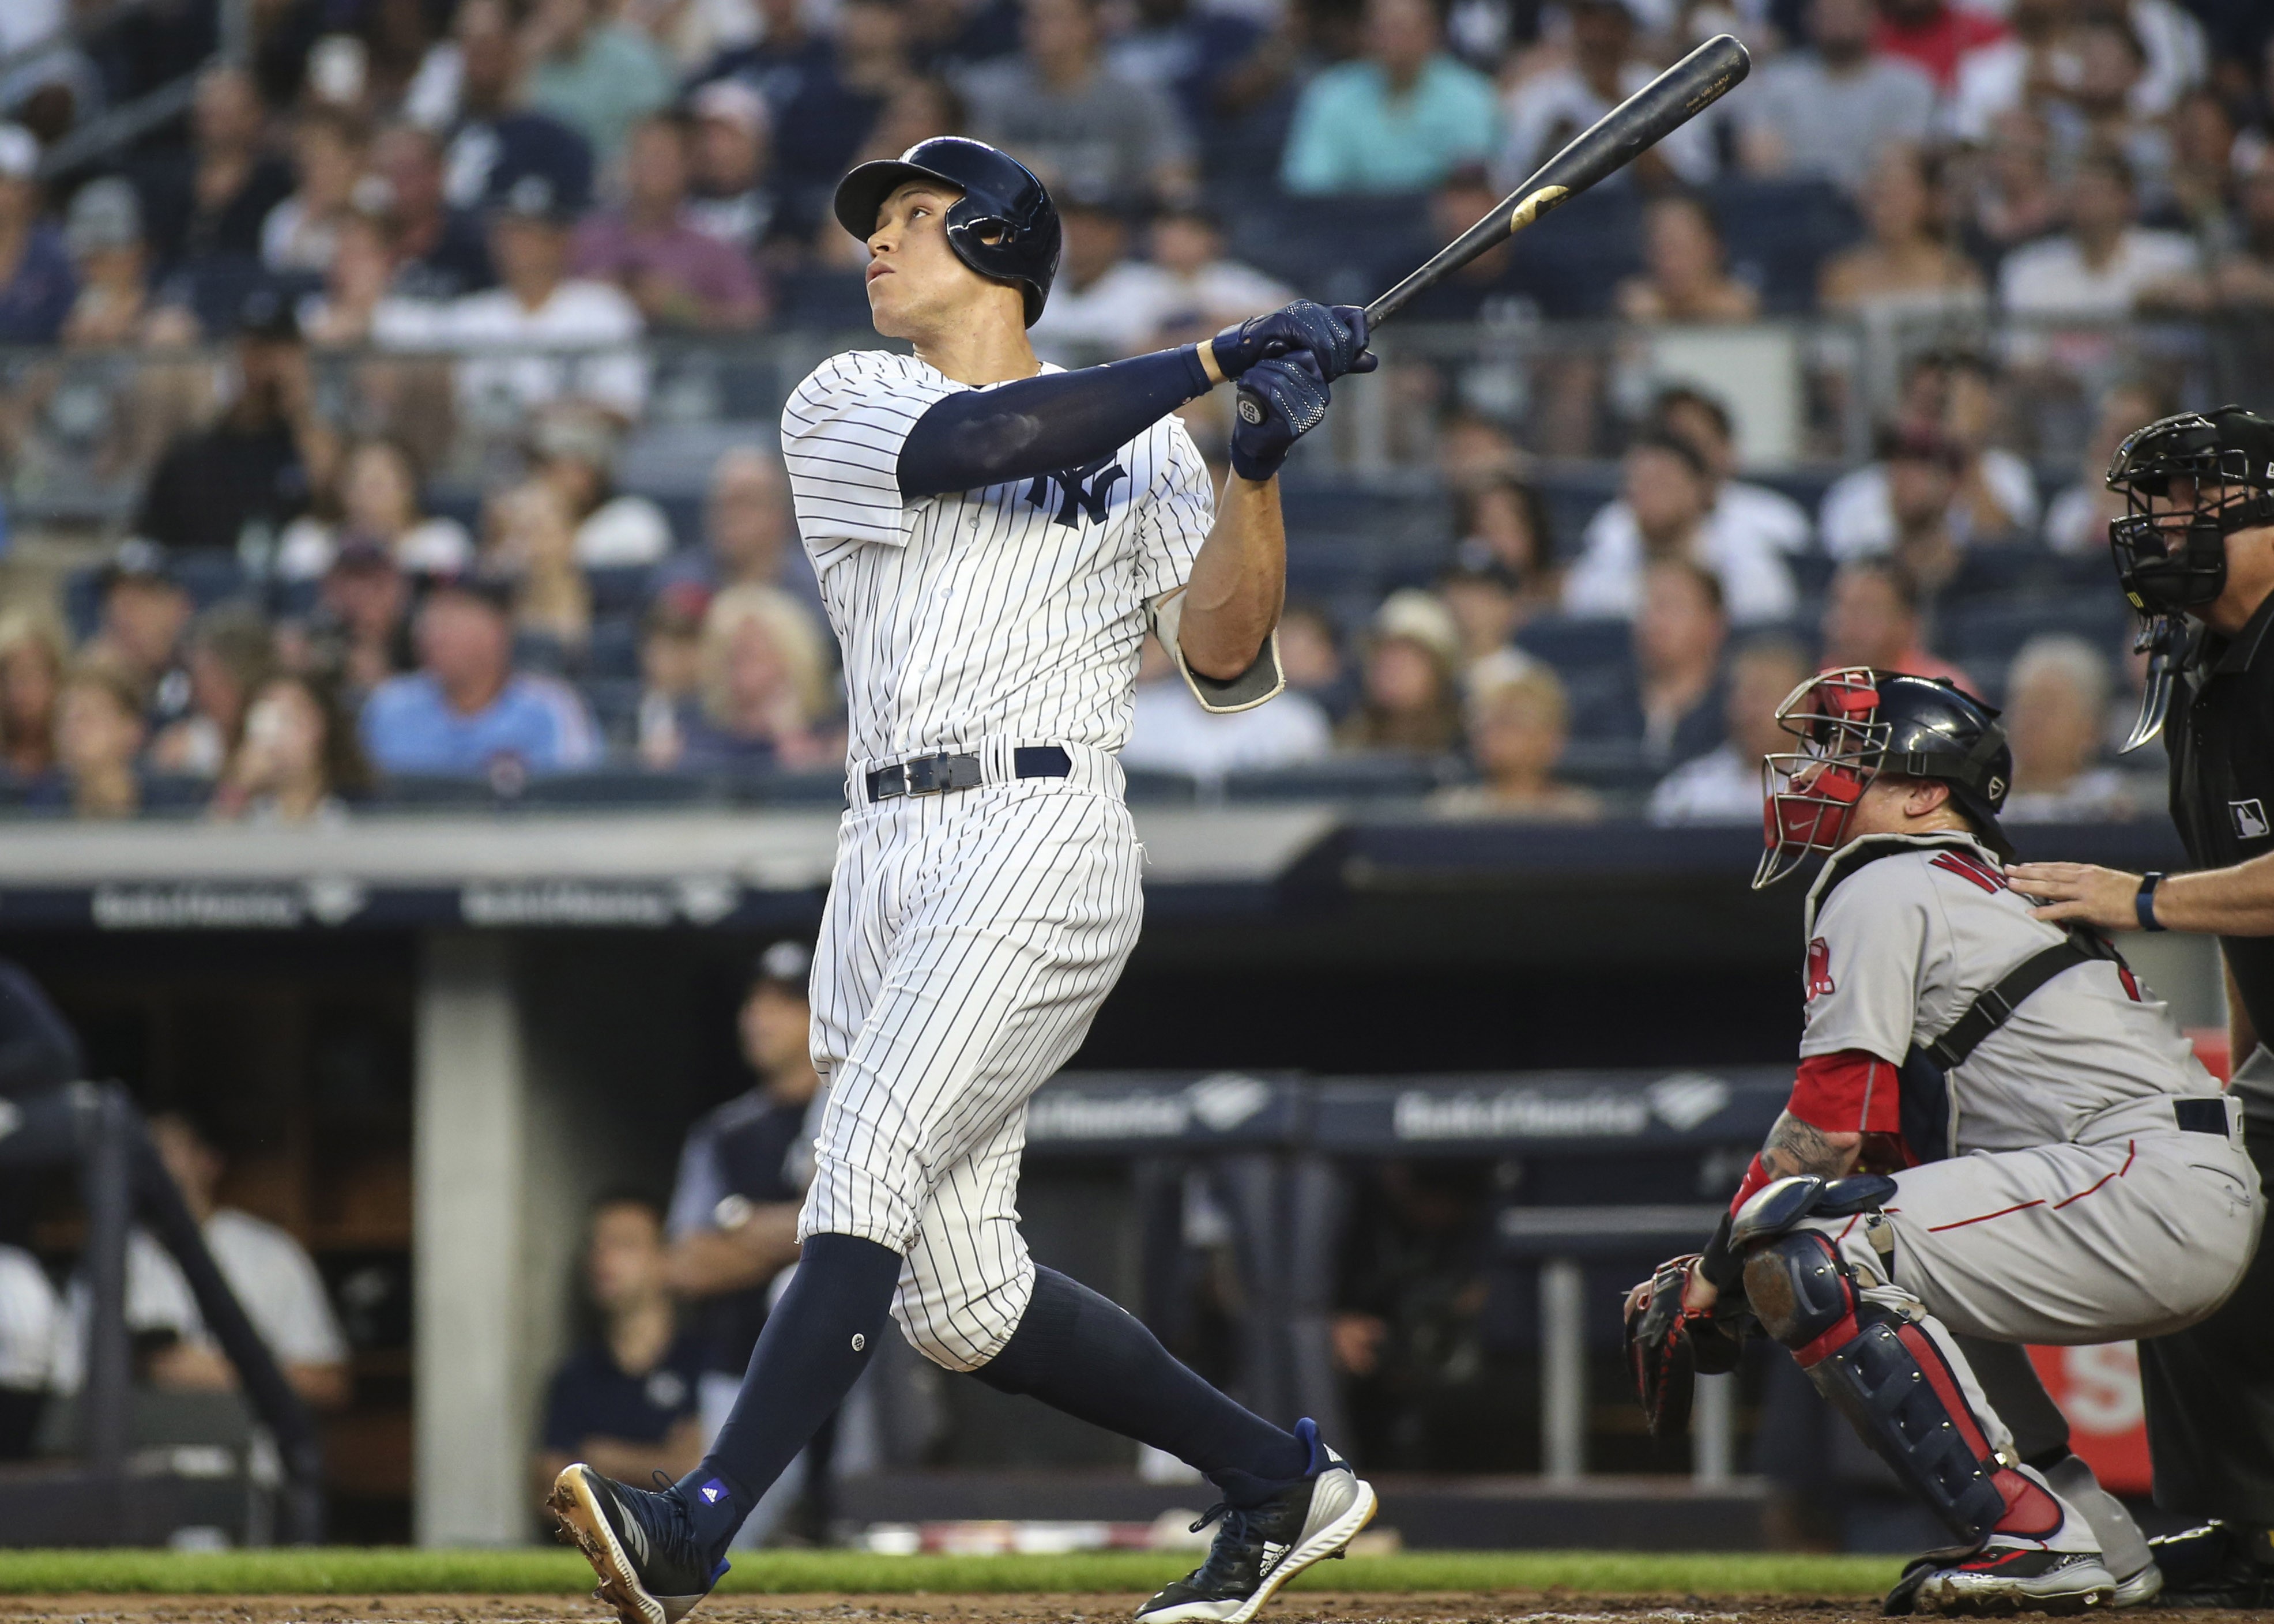 How much power to the New York Yankees have in their batting order?